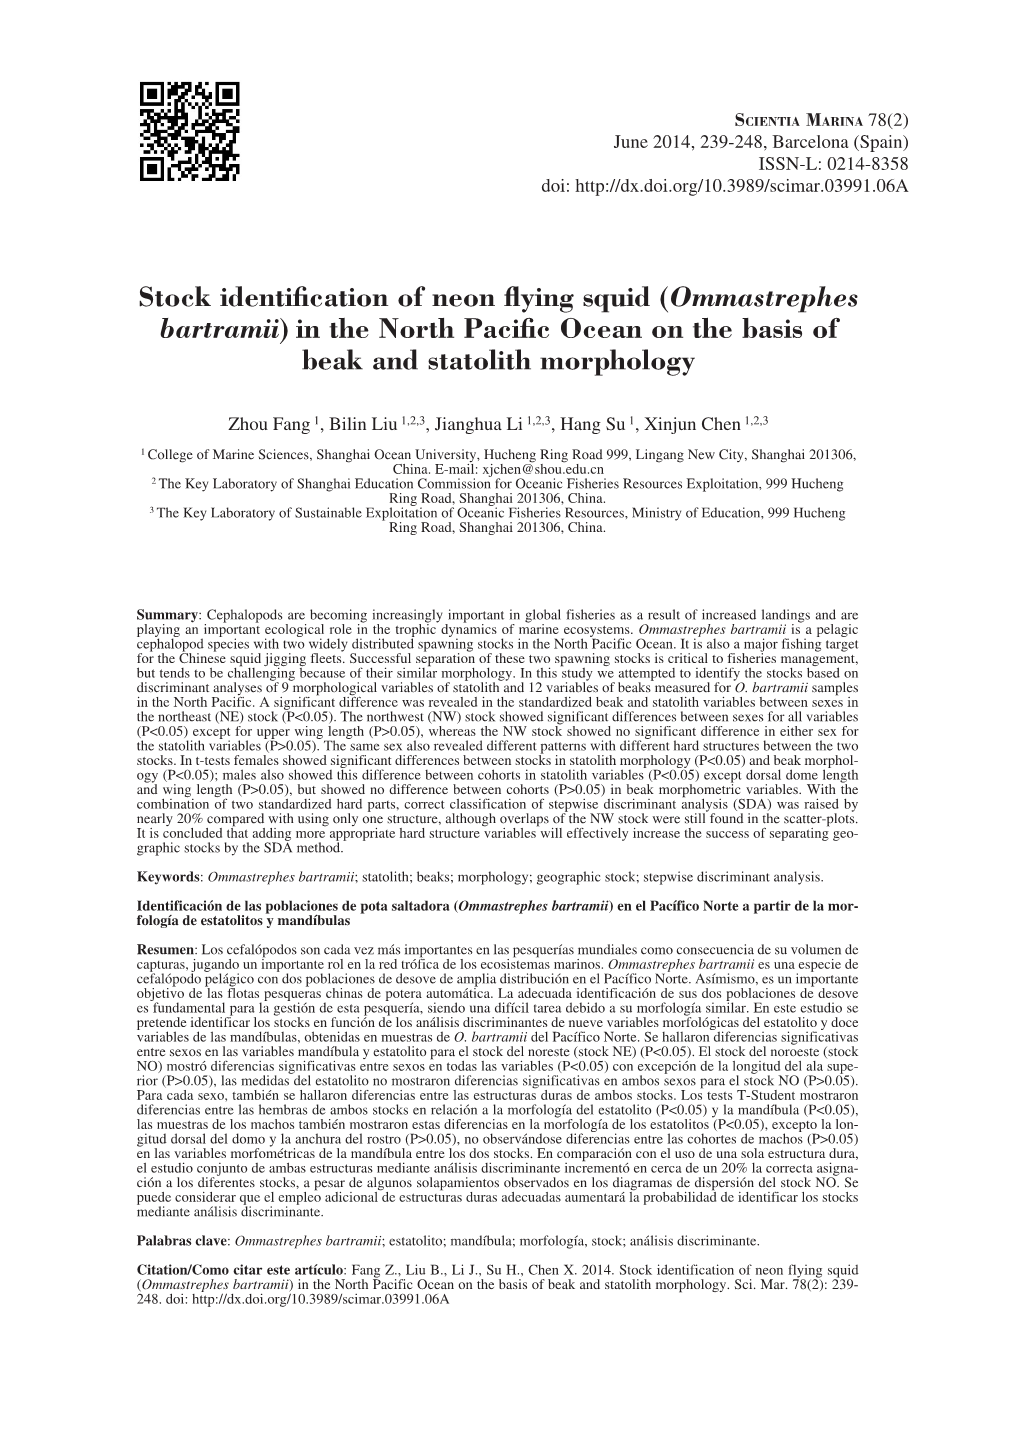 Stock Identification of Neon Flying Squid (Ommastrephes Bartramii) in the North Pacific Ocean on the Basis of Beak and Statolith Morphology